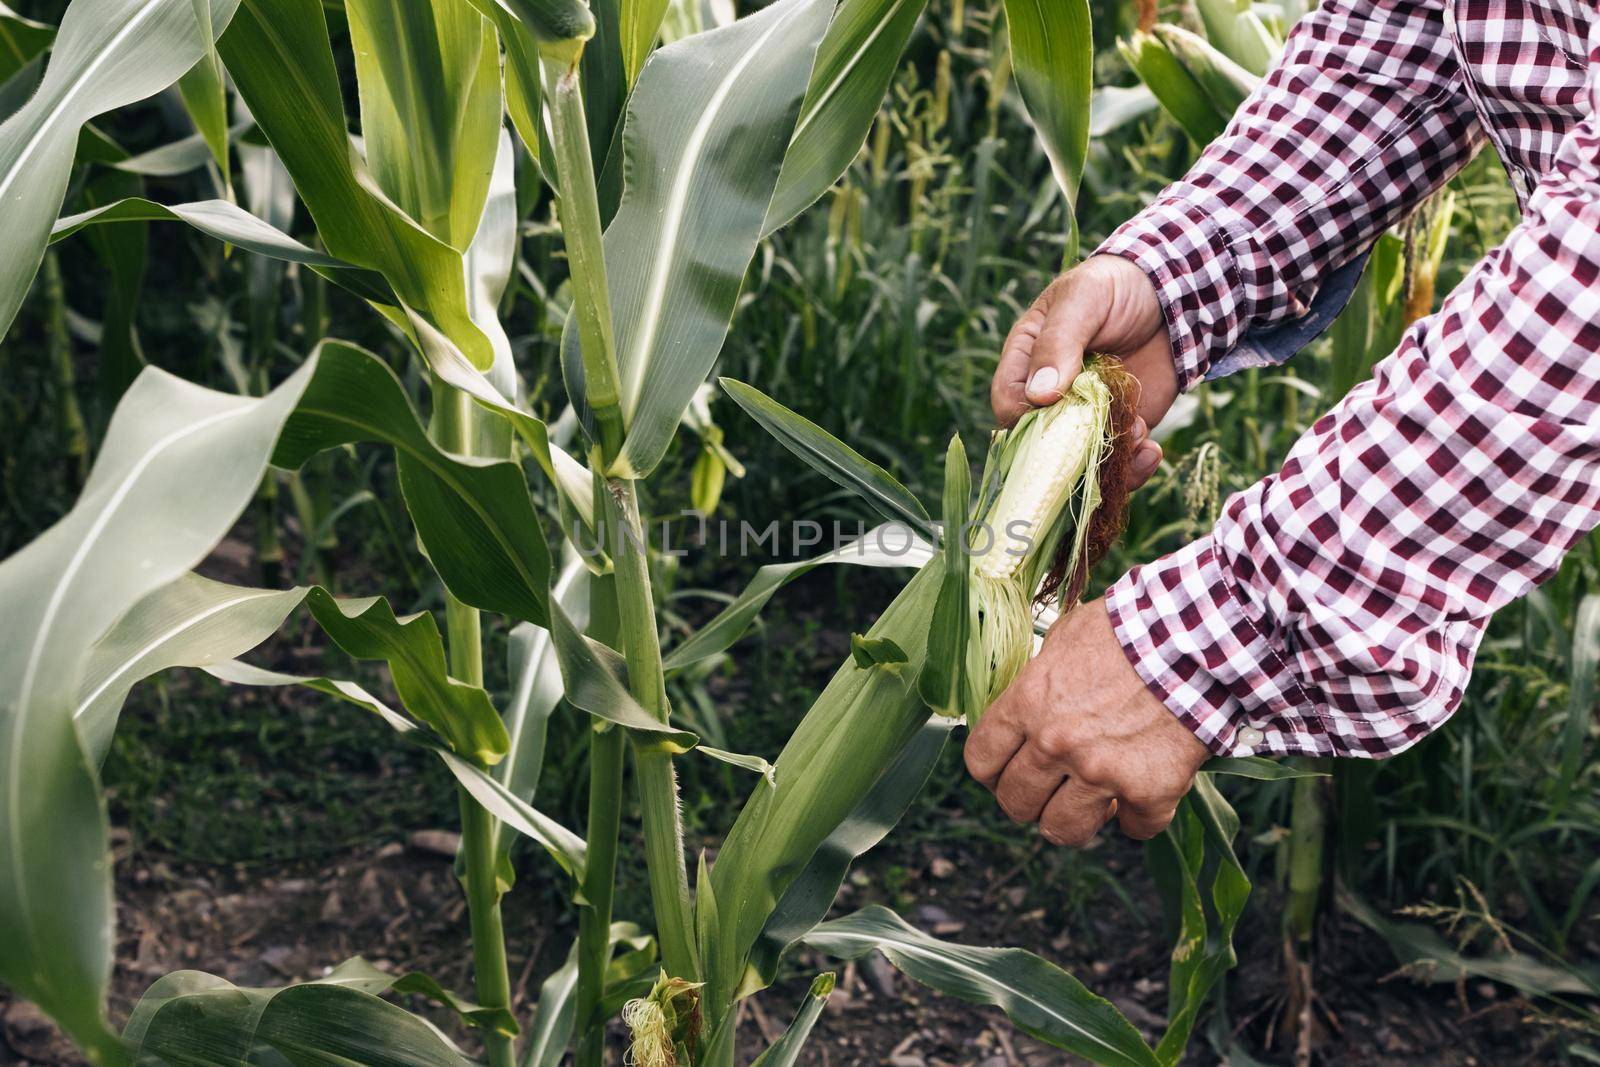 Farmers Work Corn Field. Agriculture Corn Farm Harvest. Golden Corn Growing. Ecological Farmer, Organic Horticulture, Producing Food And Crops, Organic Farming, Agricultural Land Area. Corn Harvest by uflypro